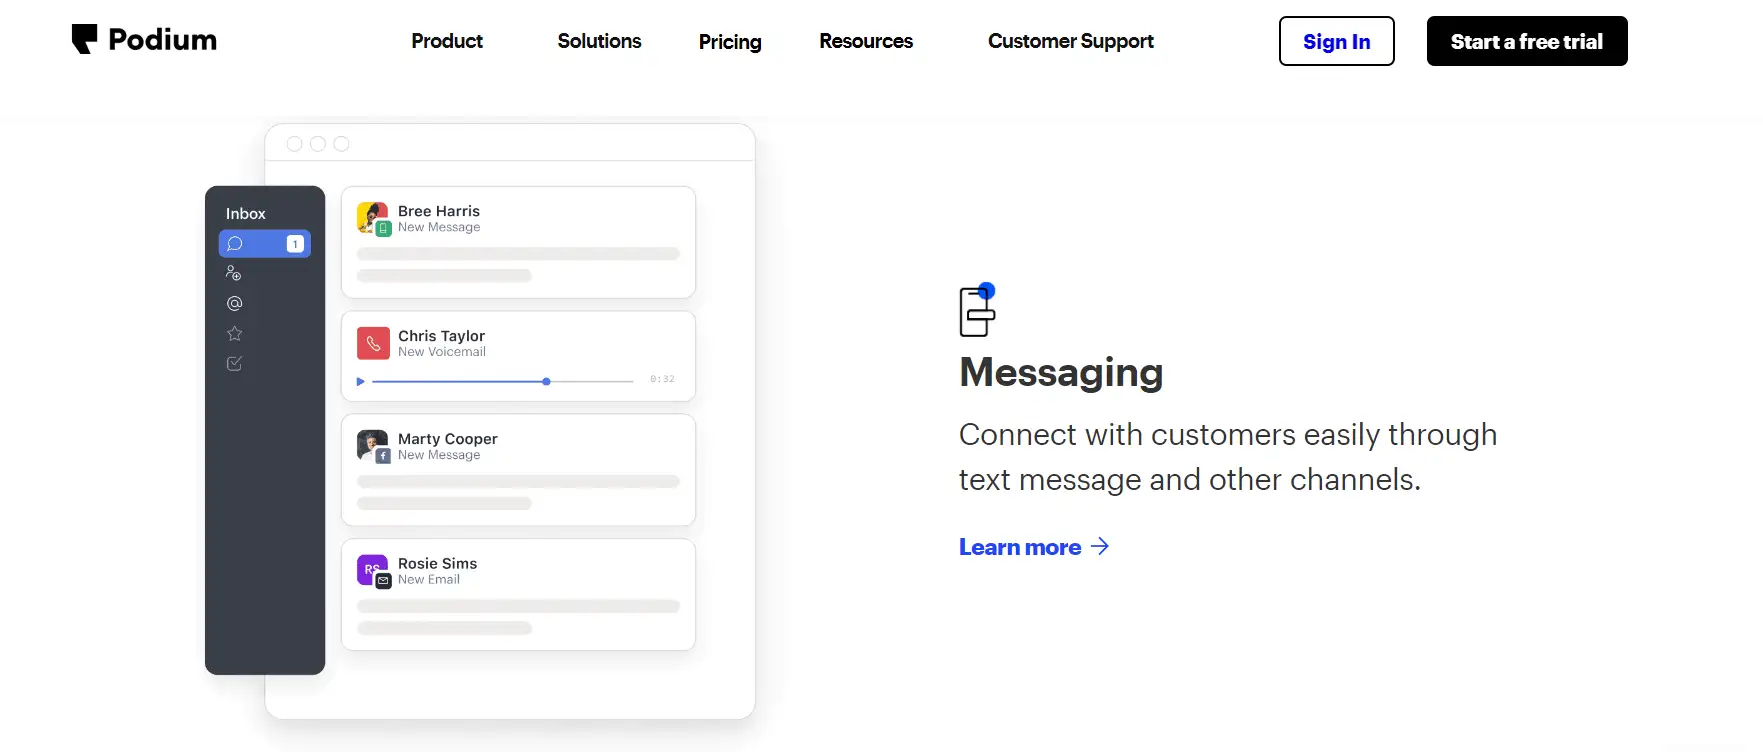 Organize Messages in One Place